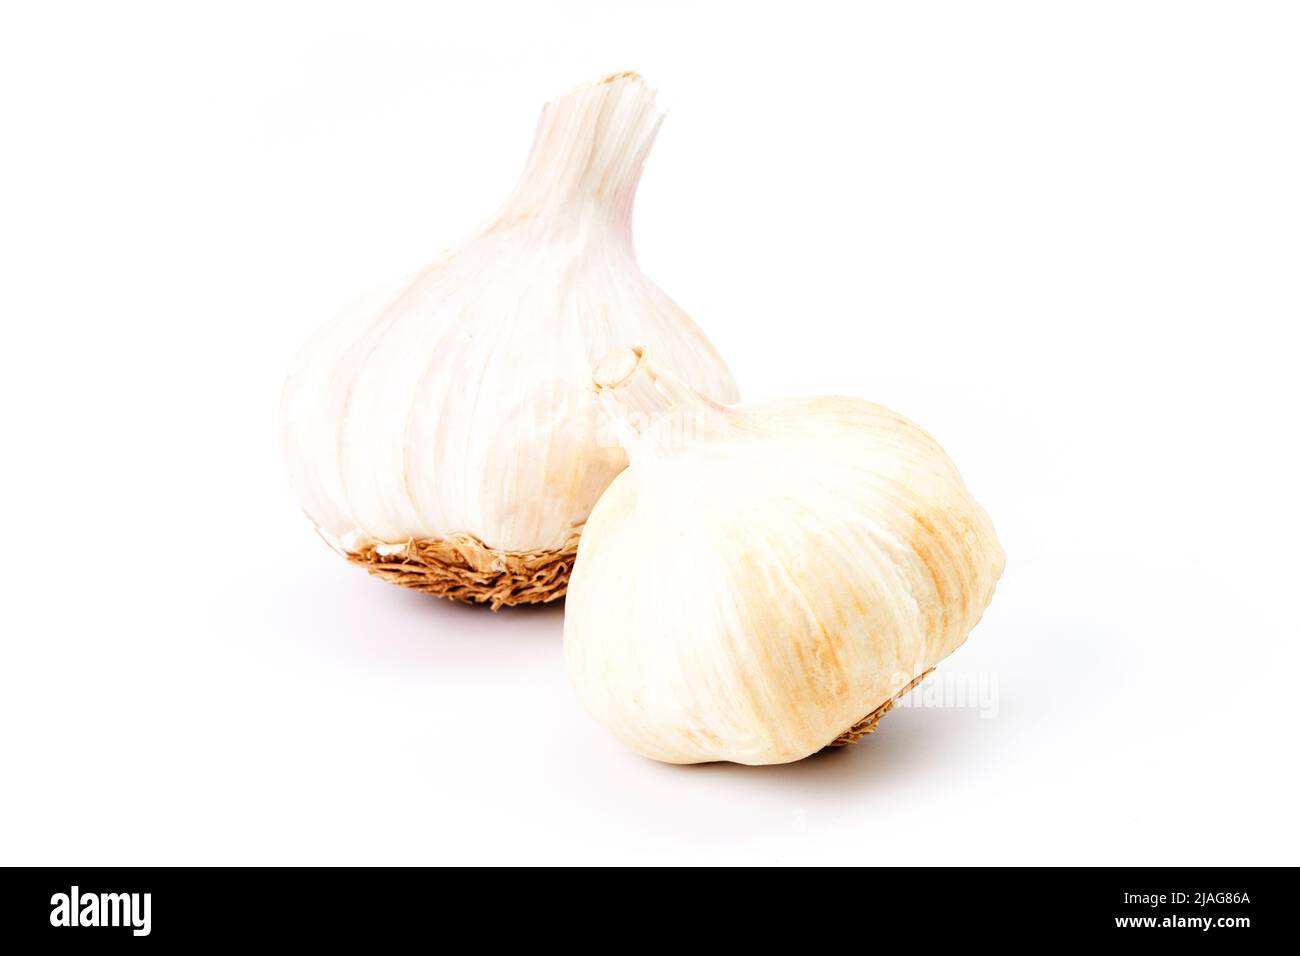 Two heads of garlic on a white background. Vegetarian food. Ecological food Stock Photo